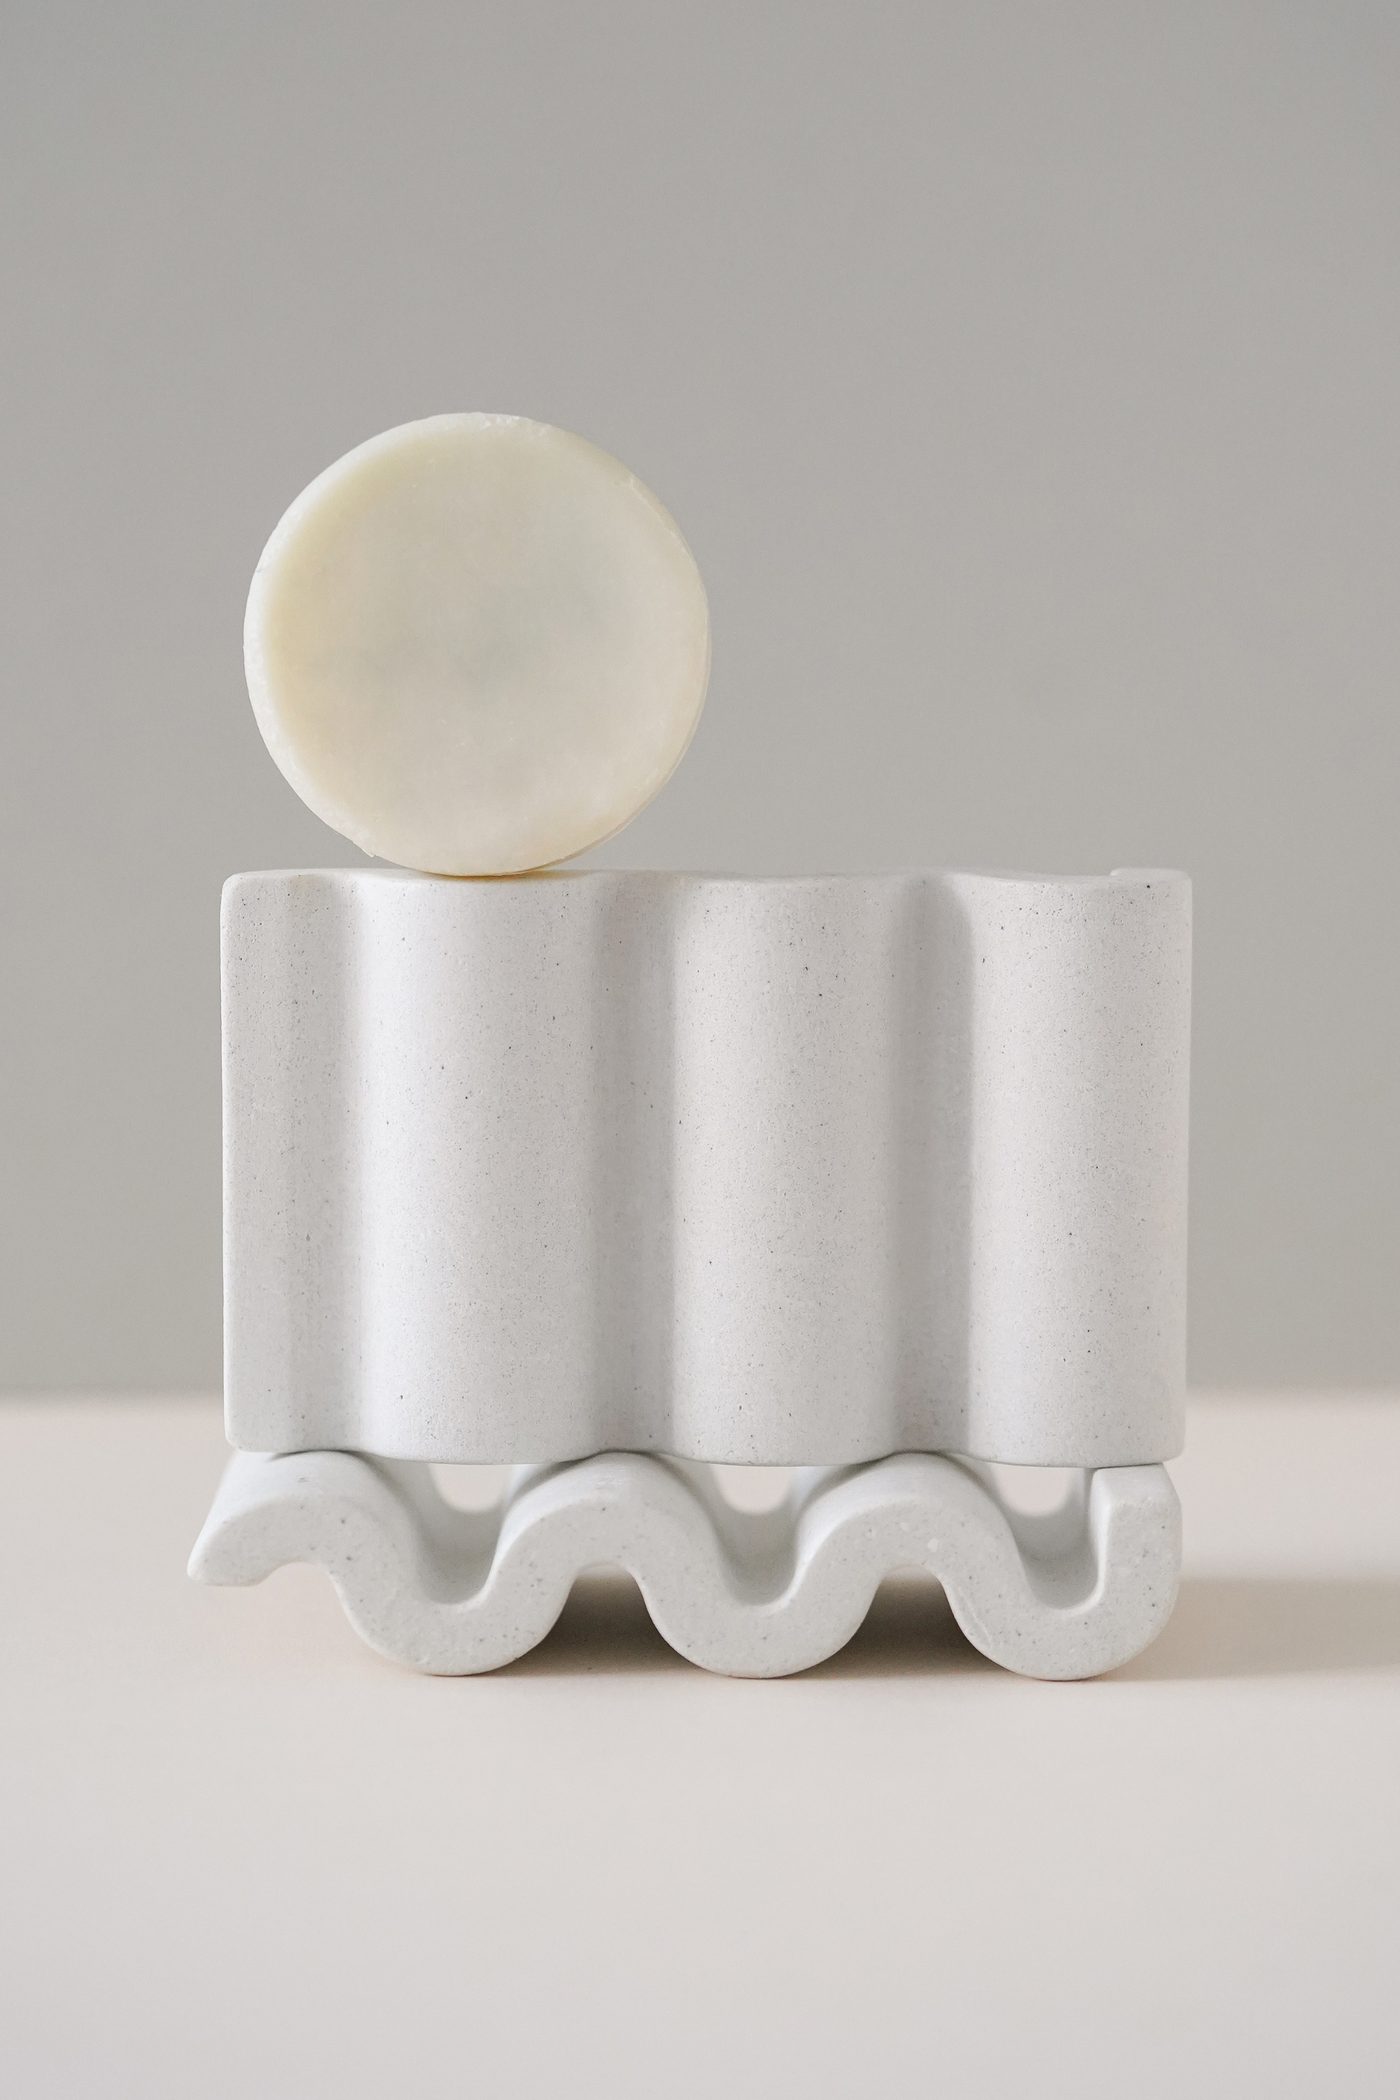 Gentle Mood WhiteWave Concrete Soap Dish, available on ZERRIN with free Singapore shipping